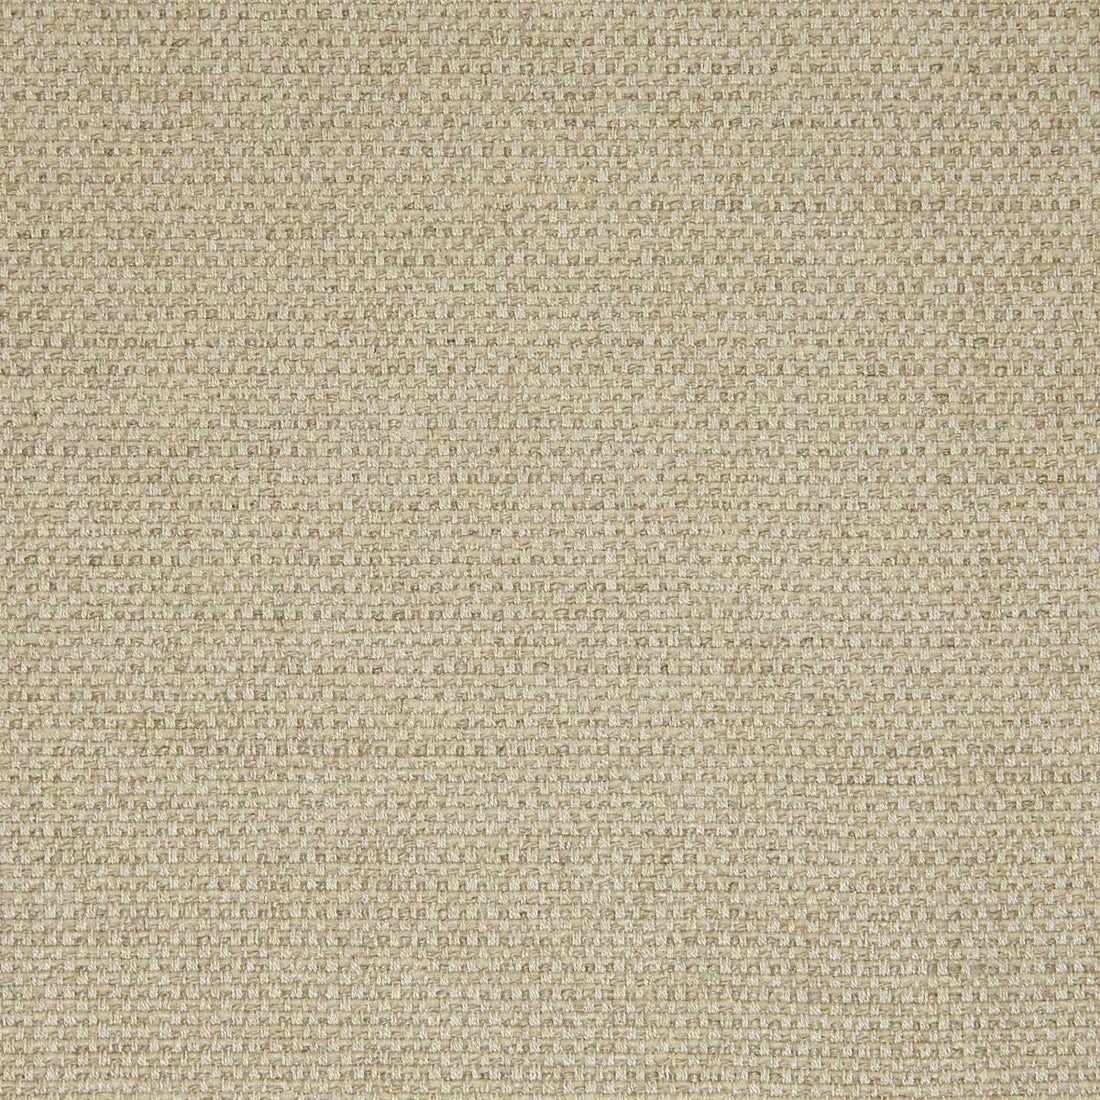 Godai fabric in 6 color - pattern LZ-30349.06.0 - by Kravet Design in the Lizzo collection